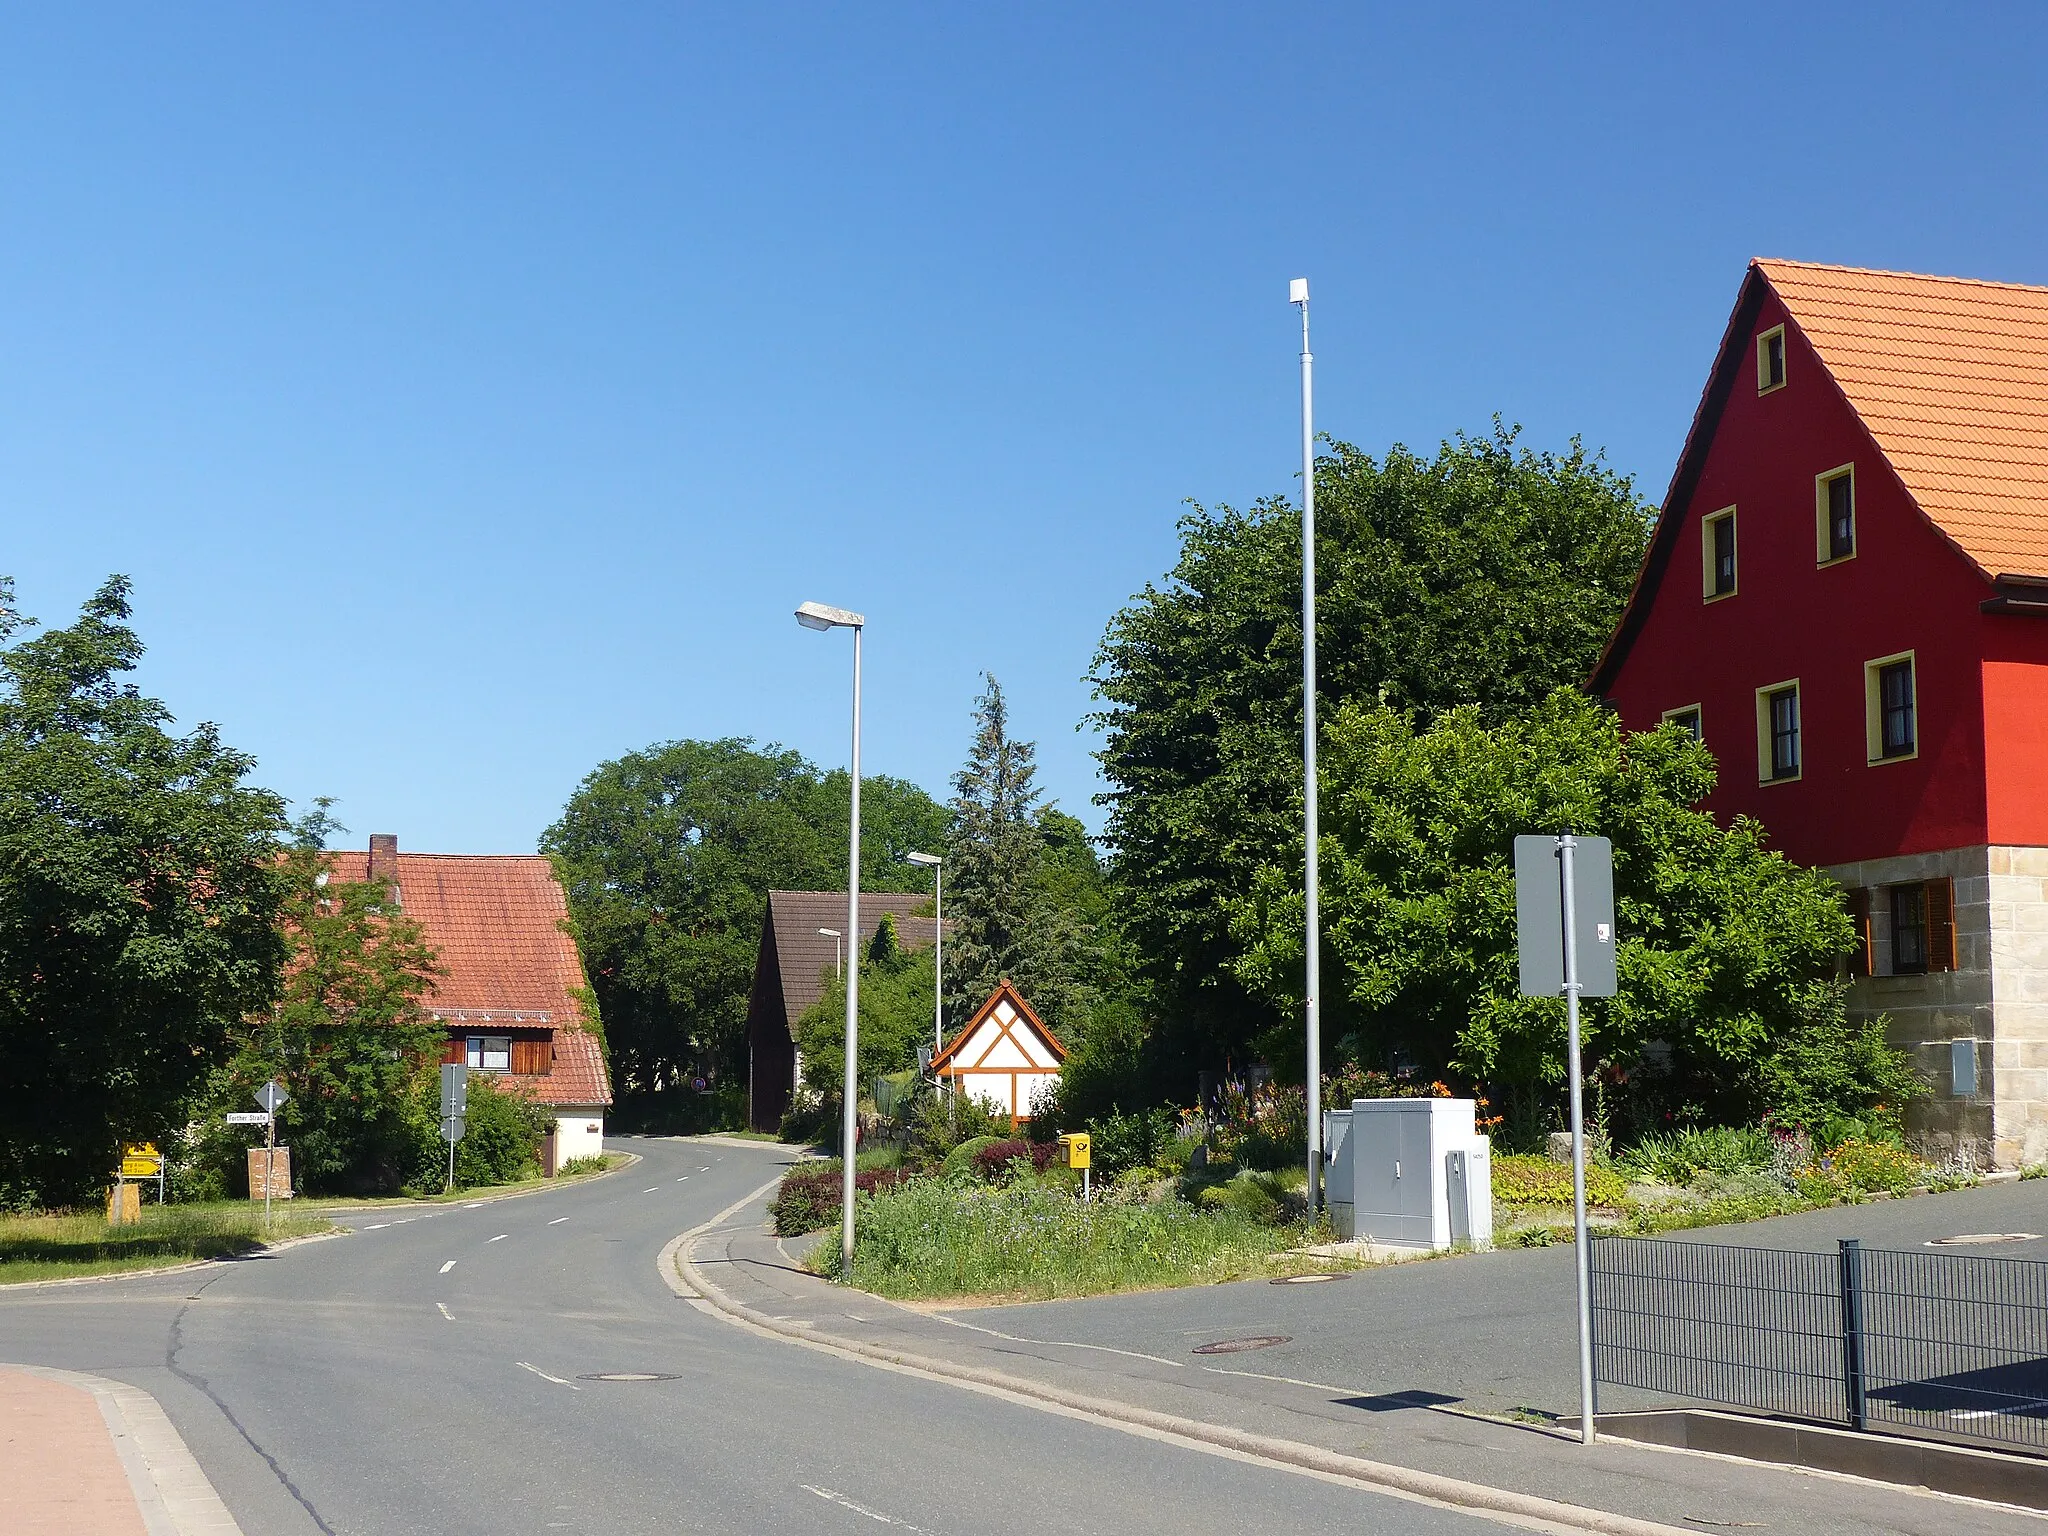 Photo showing: The village Unterrüsselbach, a district of the municipality of Igensdorf